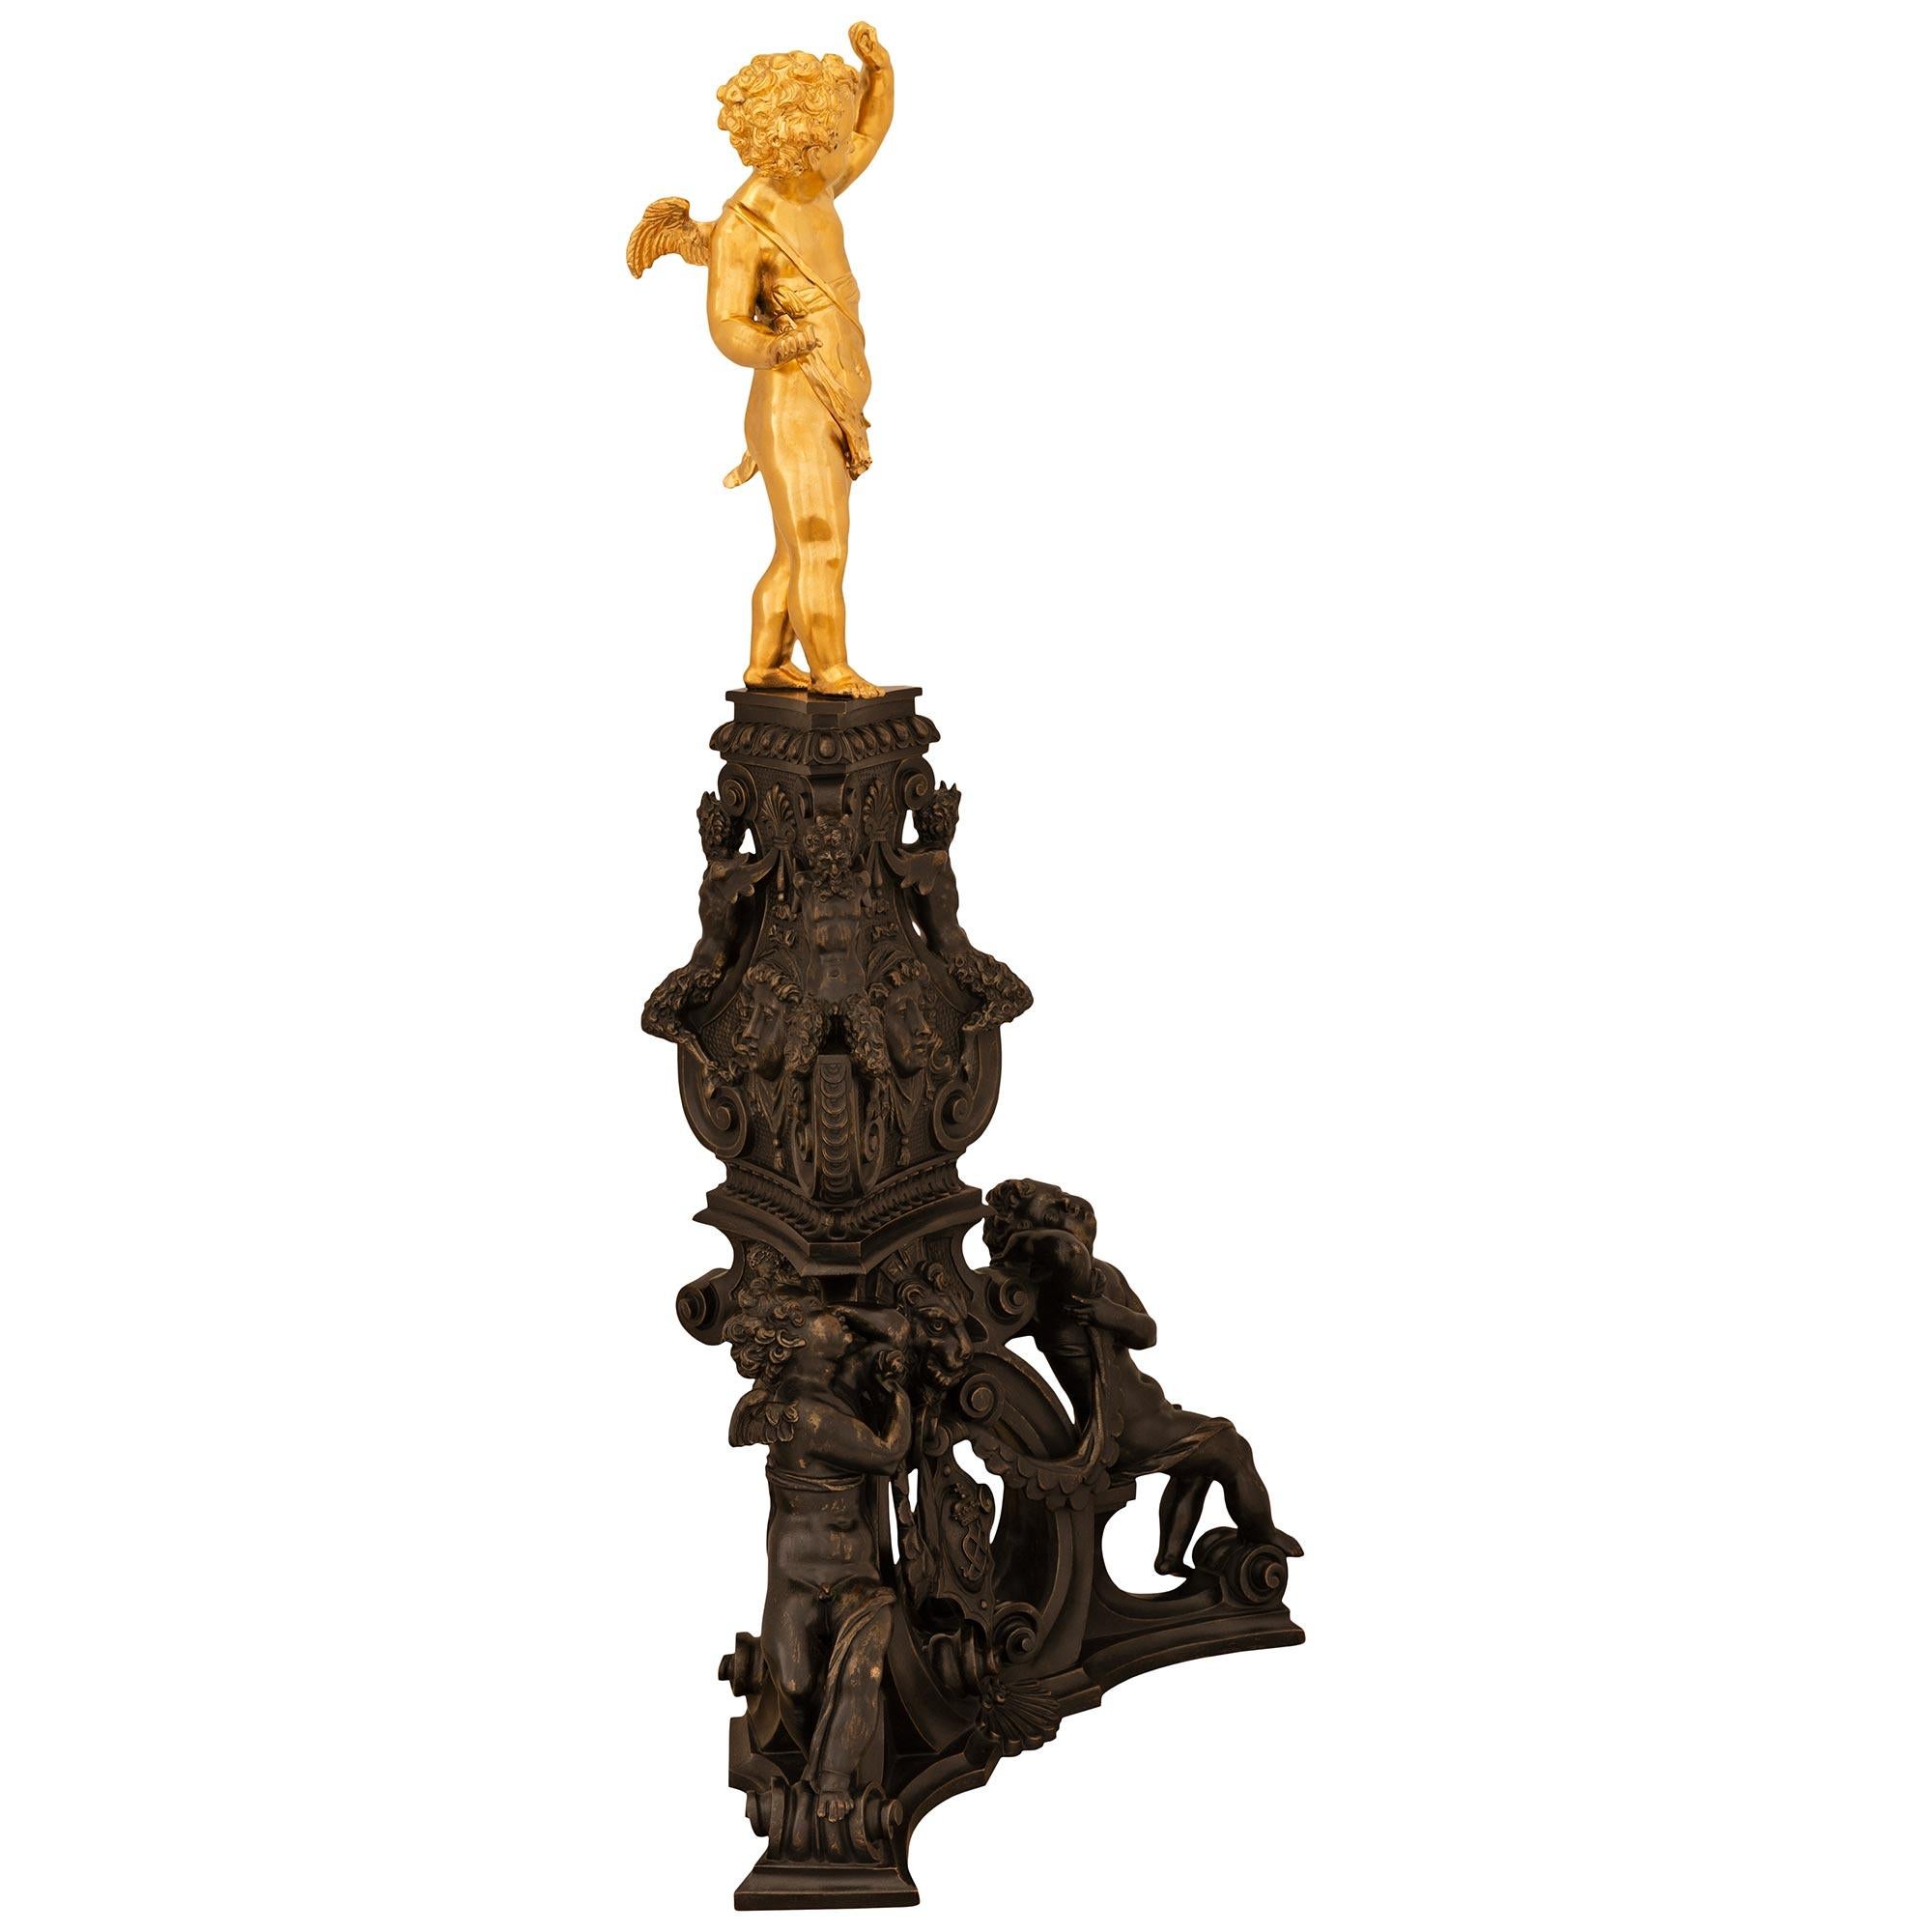 An exquisite and monumental true pair of French 19th century Napoleon III Period Renaissance st. Ormolu and patinated Bronze andirons, stamped by F. Barbedienne. Each andiron has an impressive large scaled base decorated with cherubs at the bottom